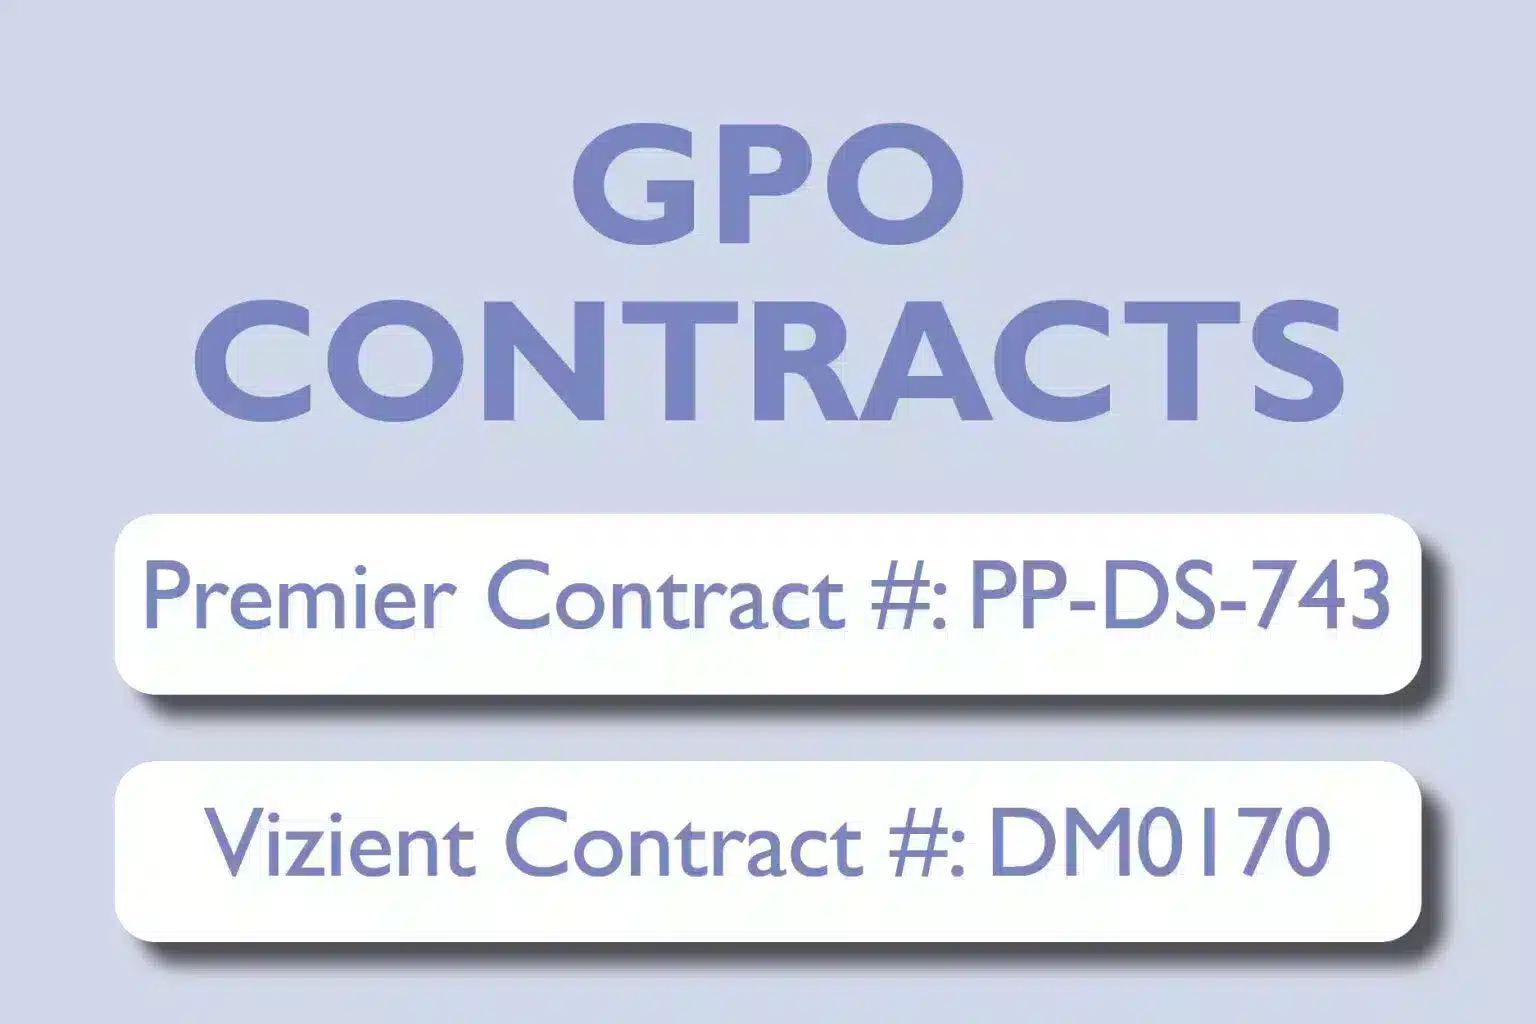 Pedi-Fit on GPO contracts Vizient and Premier